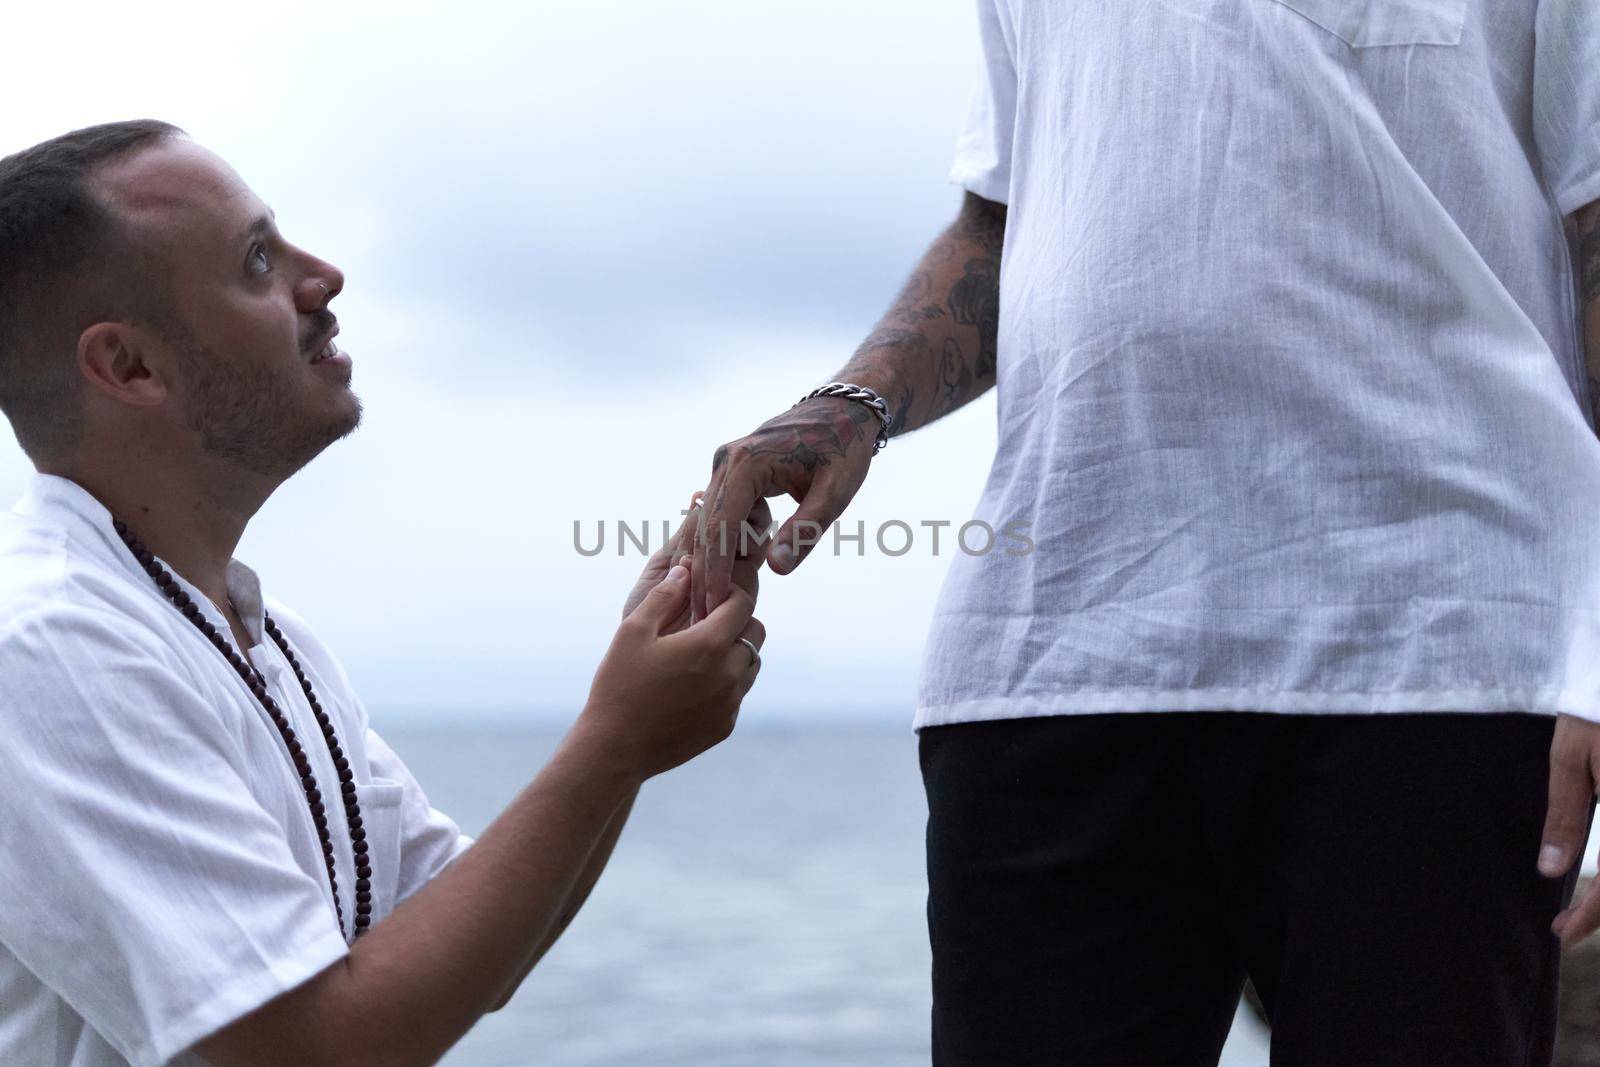 Homosexual man with an emotional face asking to marry him to his gay partner on a beach